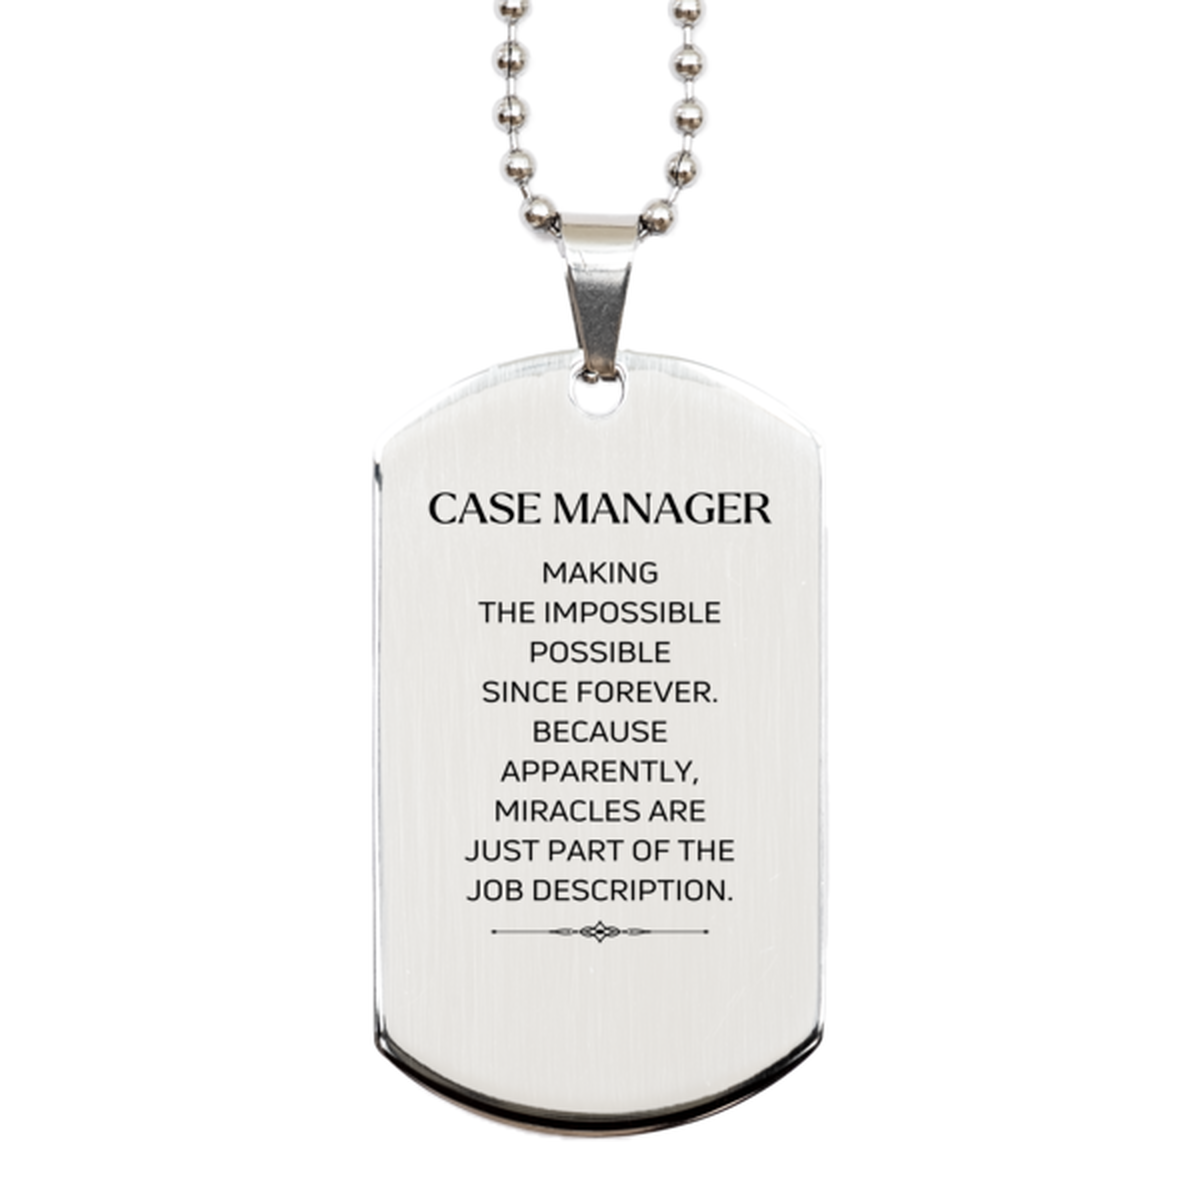 Funny Case Manager Gifts, Miracles are just part of the job description, Inspirational Birthday Silver Dog Tag For Case Manager, Men, Women, Coworkers, Friends, Boss